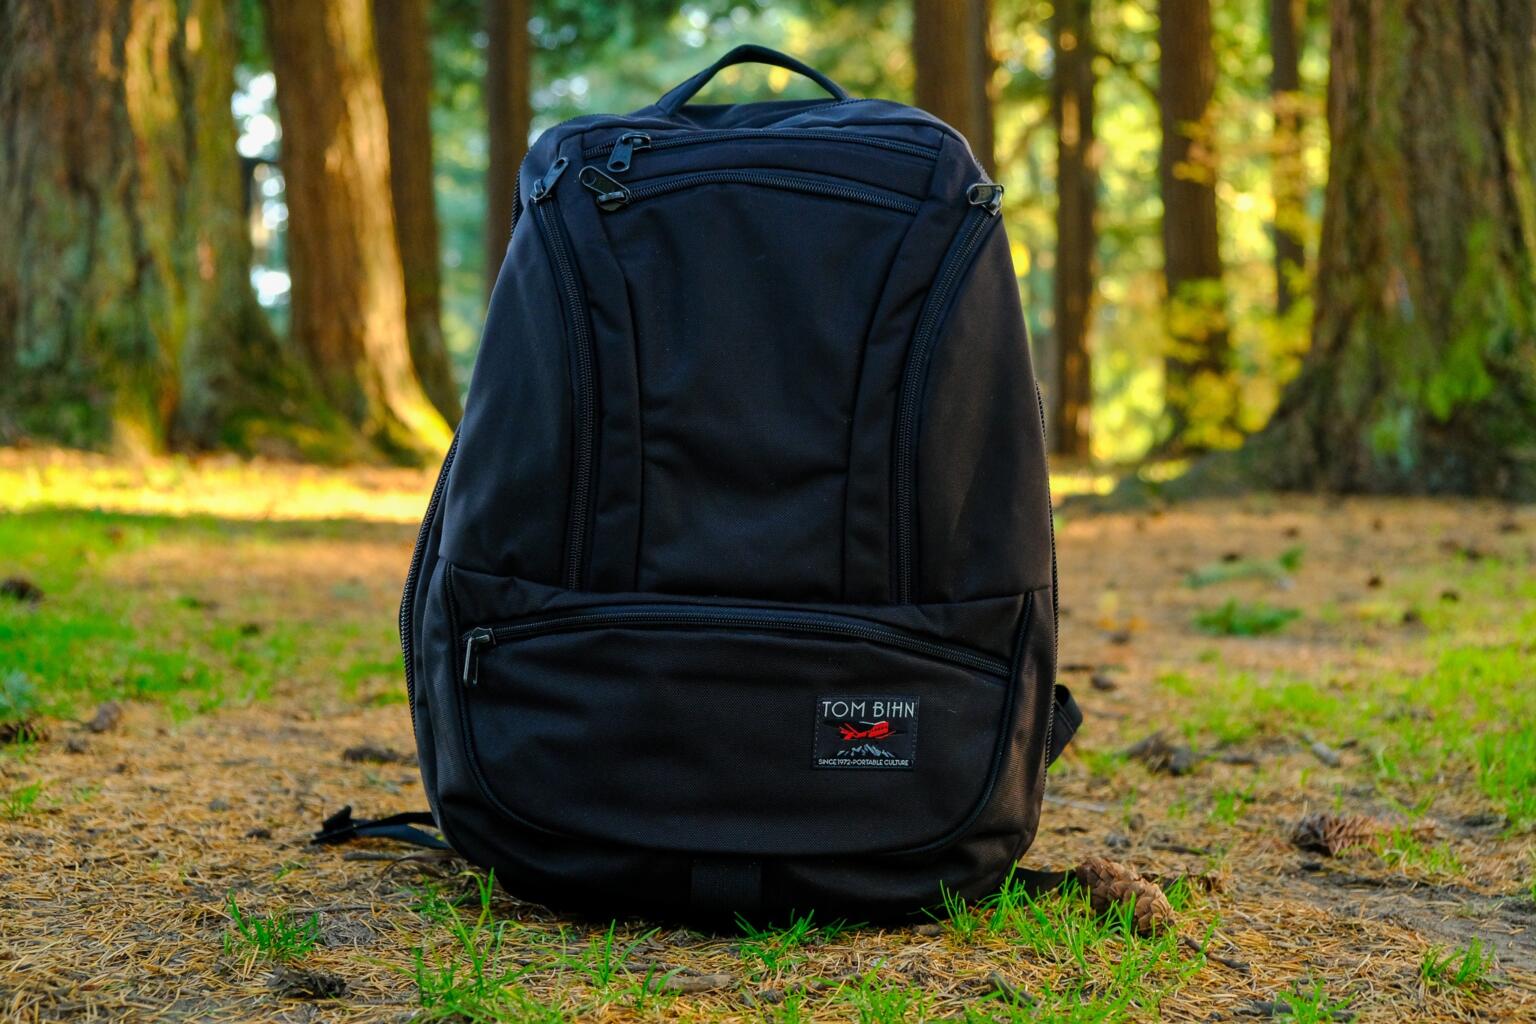 Tom Bihn Synapse review